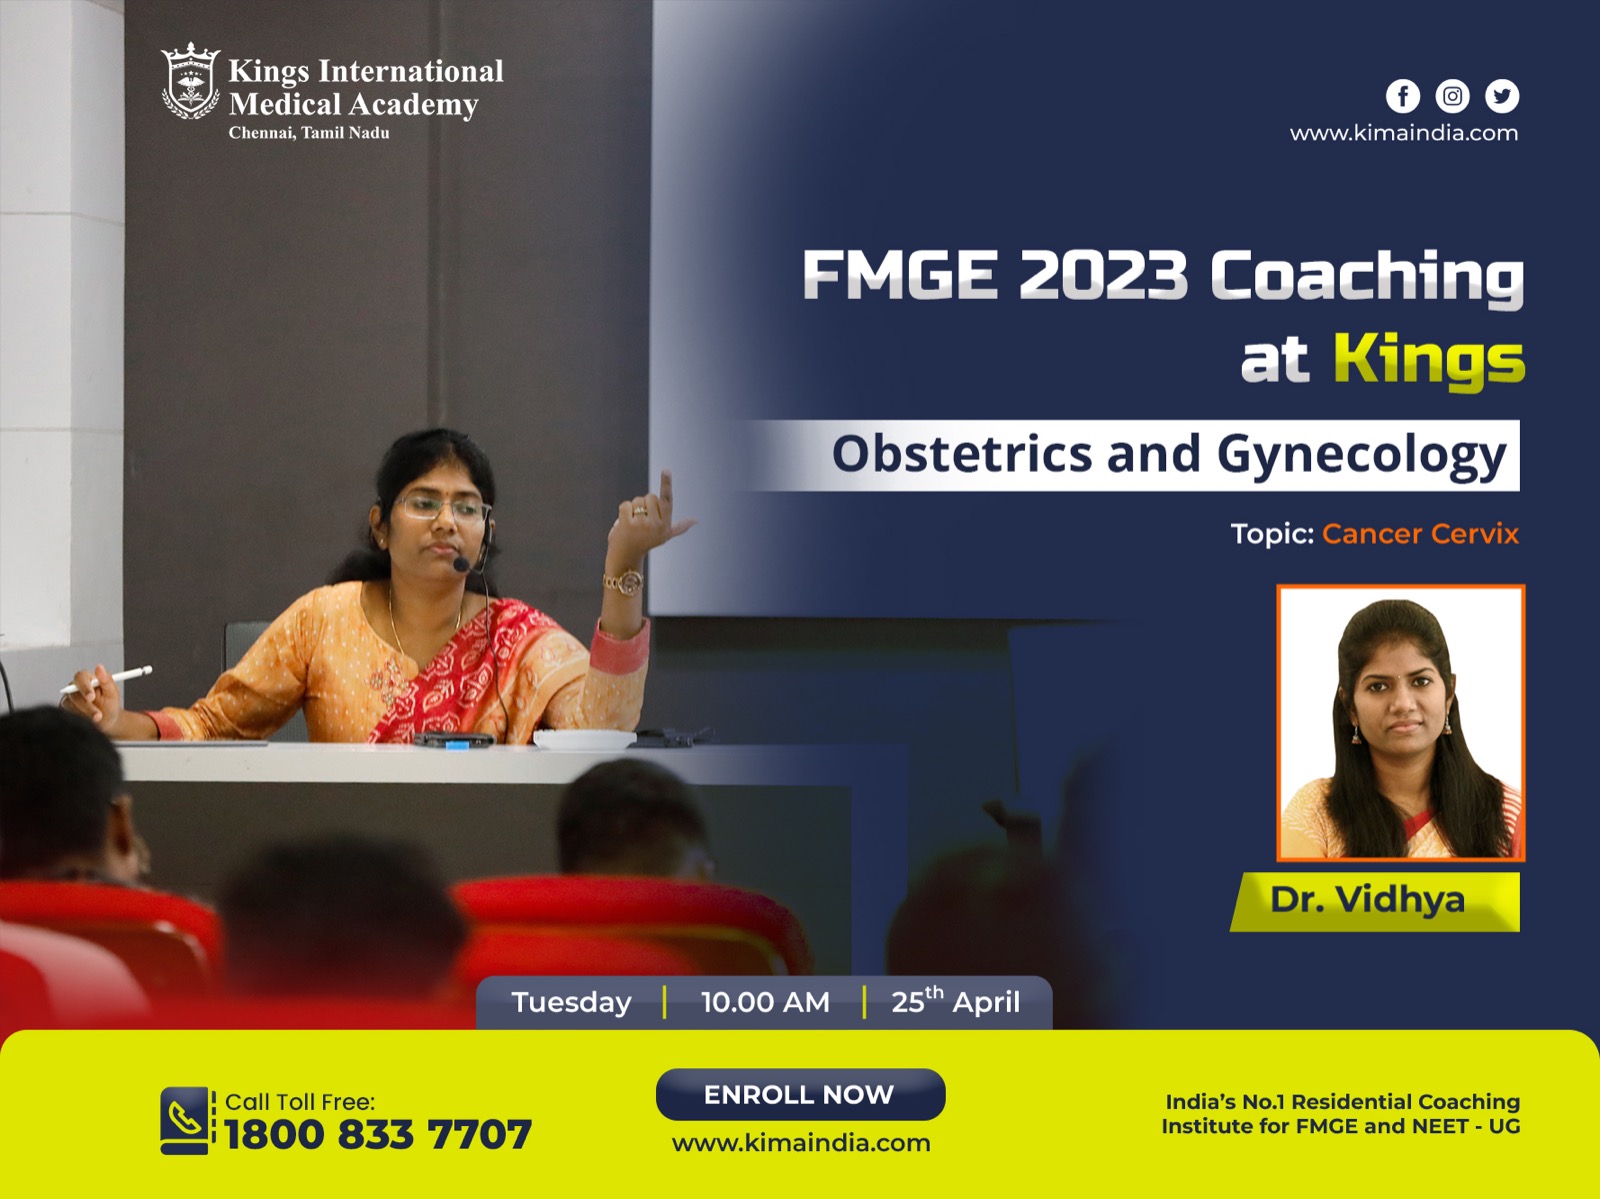 Expert Obstetrics and Gynecology Classes for our FMGE Students led by Dr. Vidhya